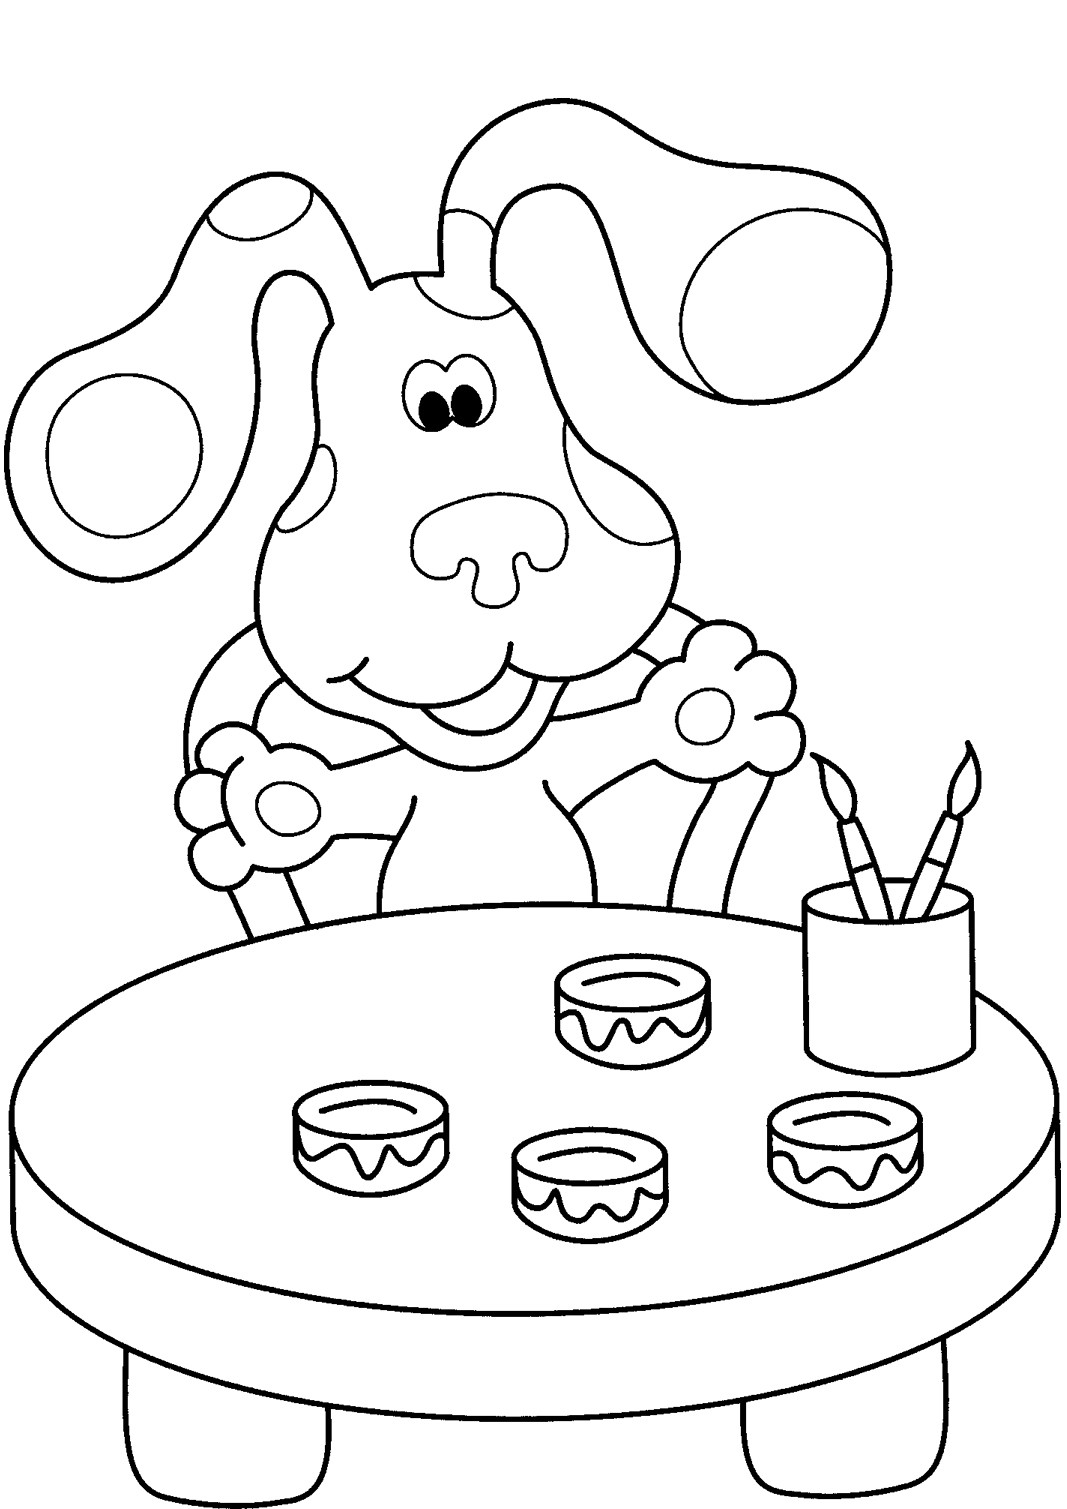 Toddler Coloring Pages Printable
 Free Printable Blues Clues Coloring Pages For Kids